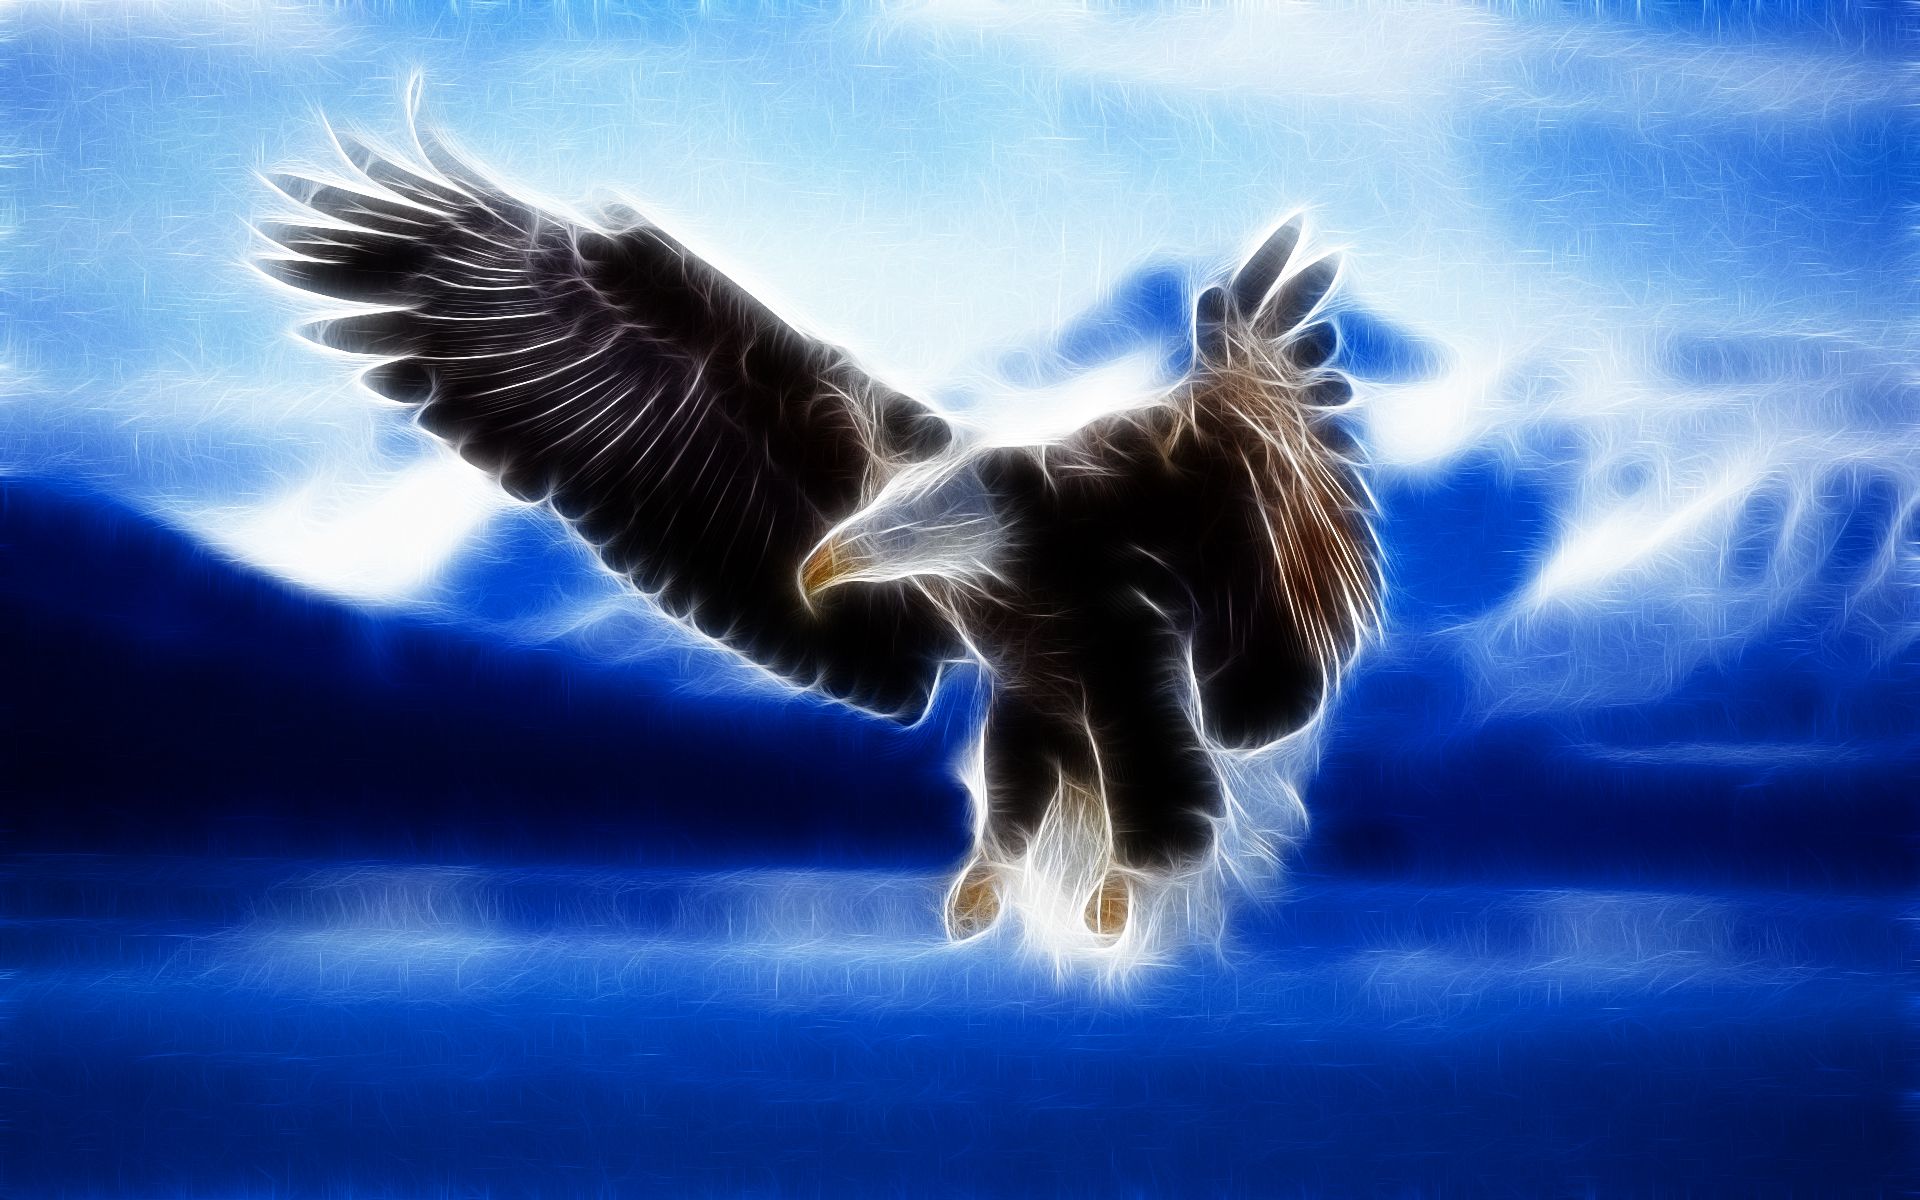 Live #Life #Right, Stay #Elevated, Stay #High. That is #How You #Fly. #Eagle #quote #carlthemuse. Bald eagle, Eagle picture, Eagle image